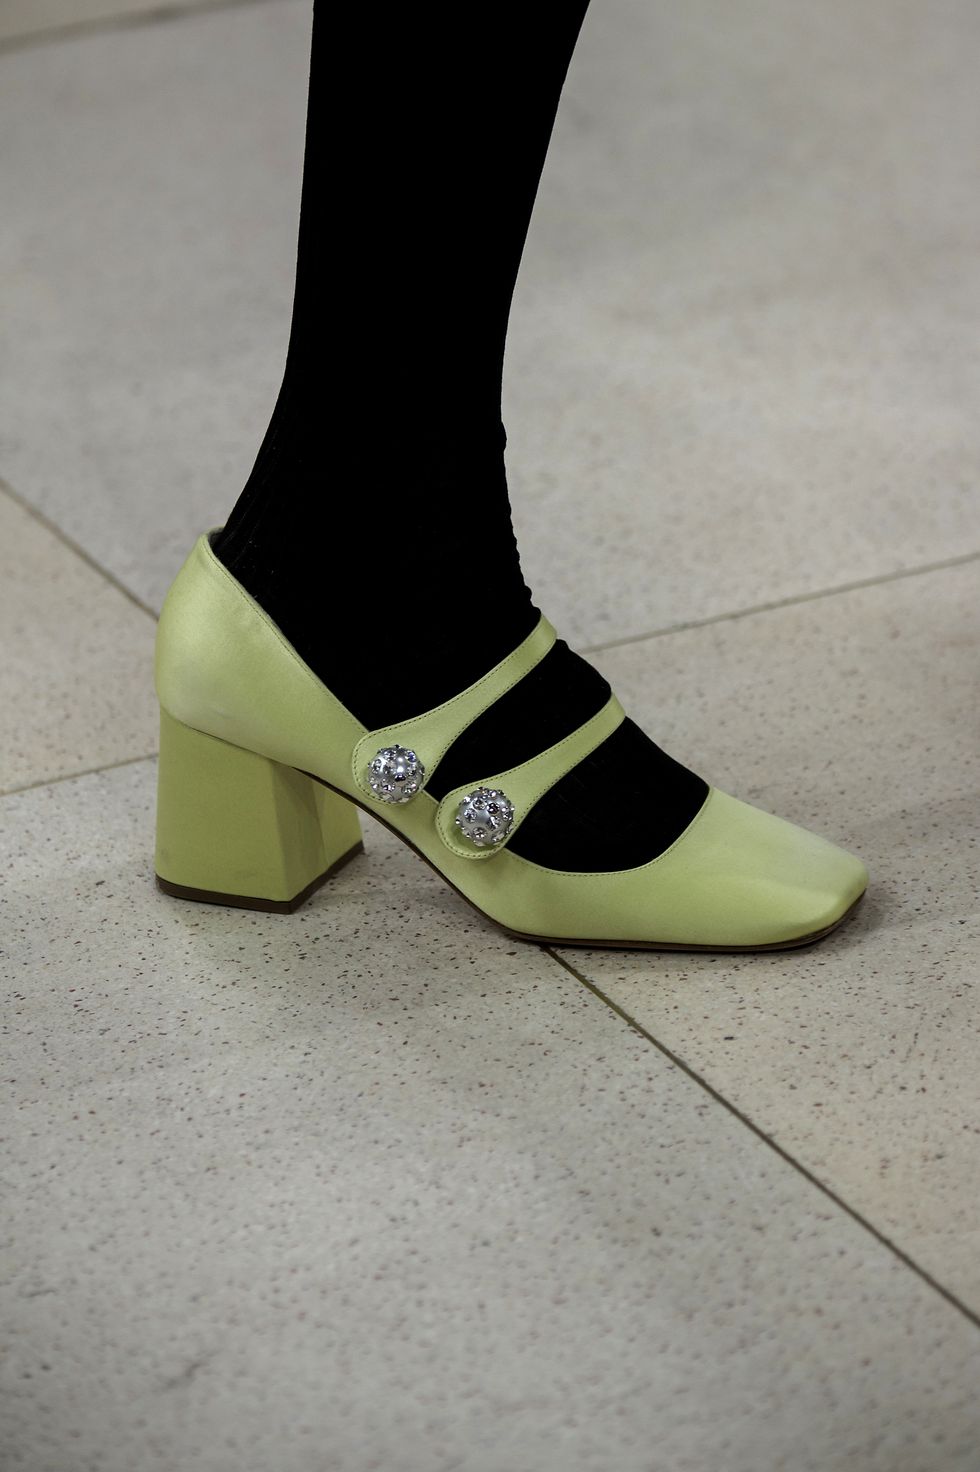 Spring summer 2019 shoe trends – 100 best sandals and shoes for SS19